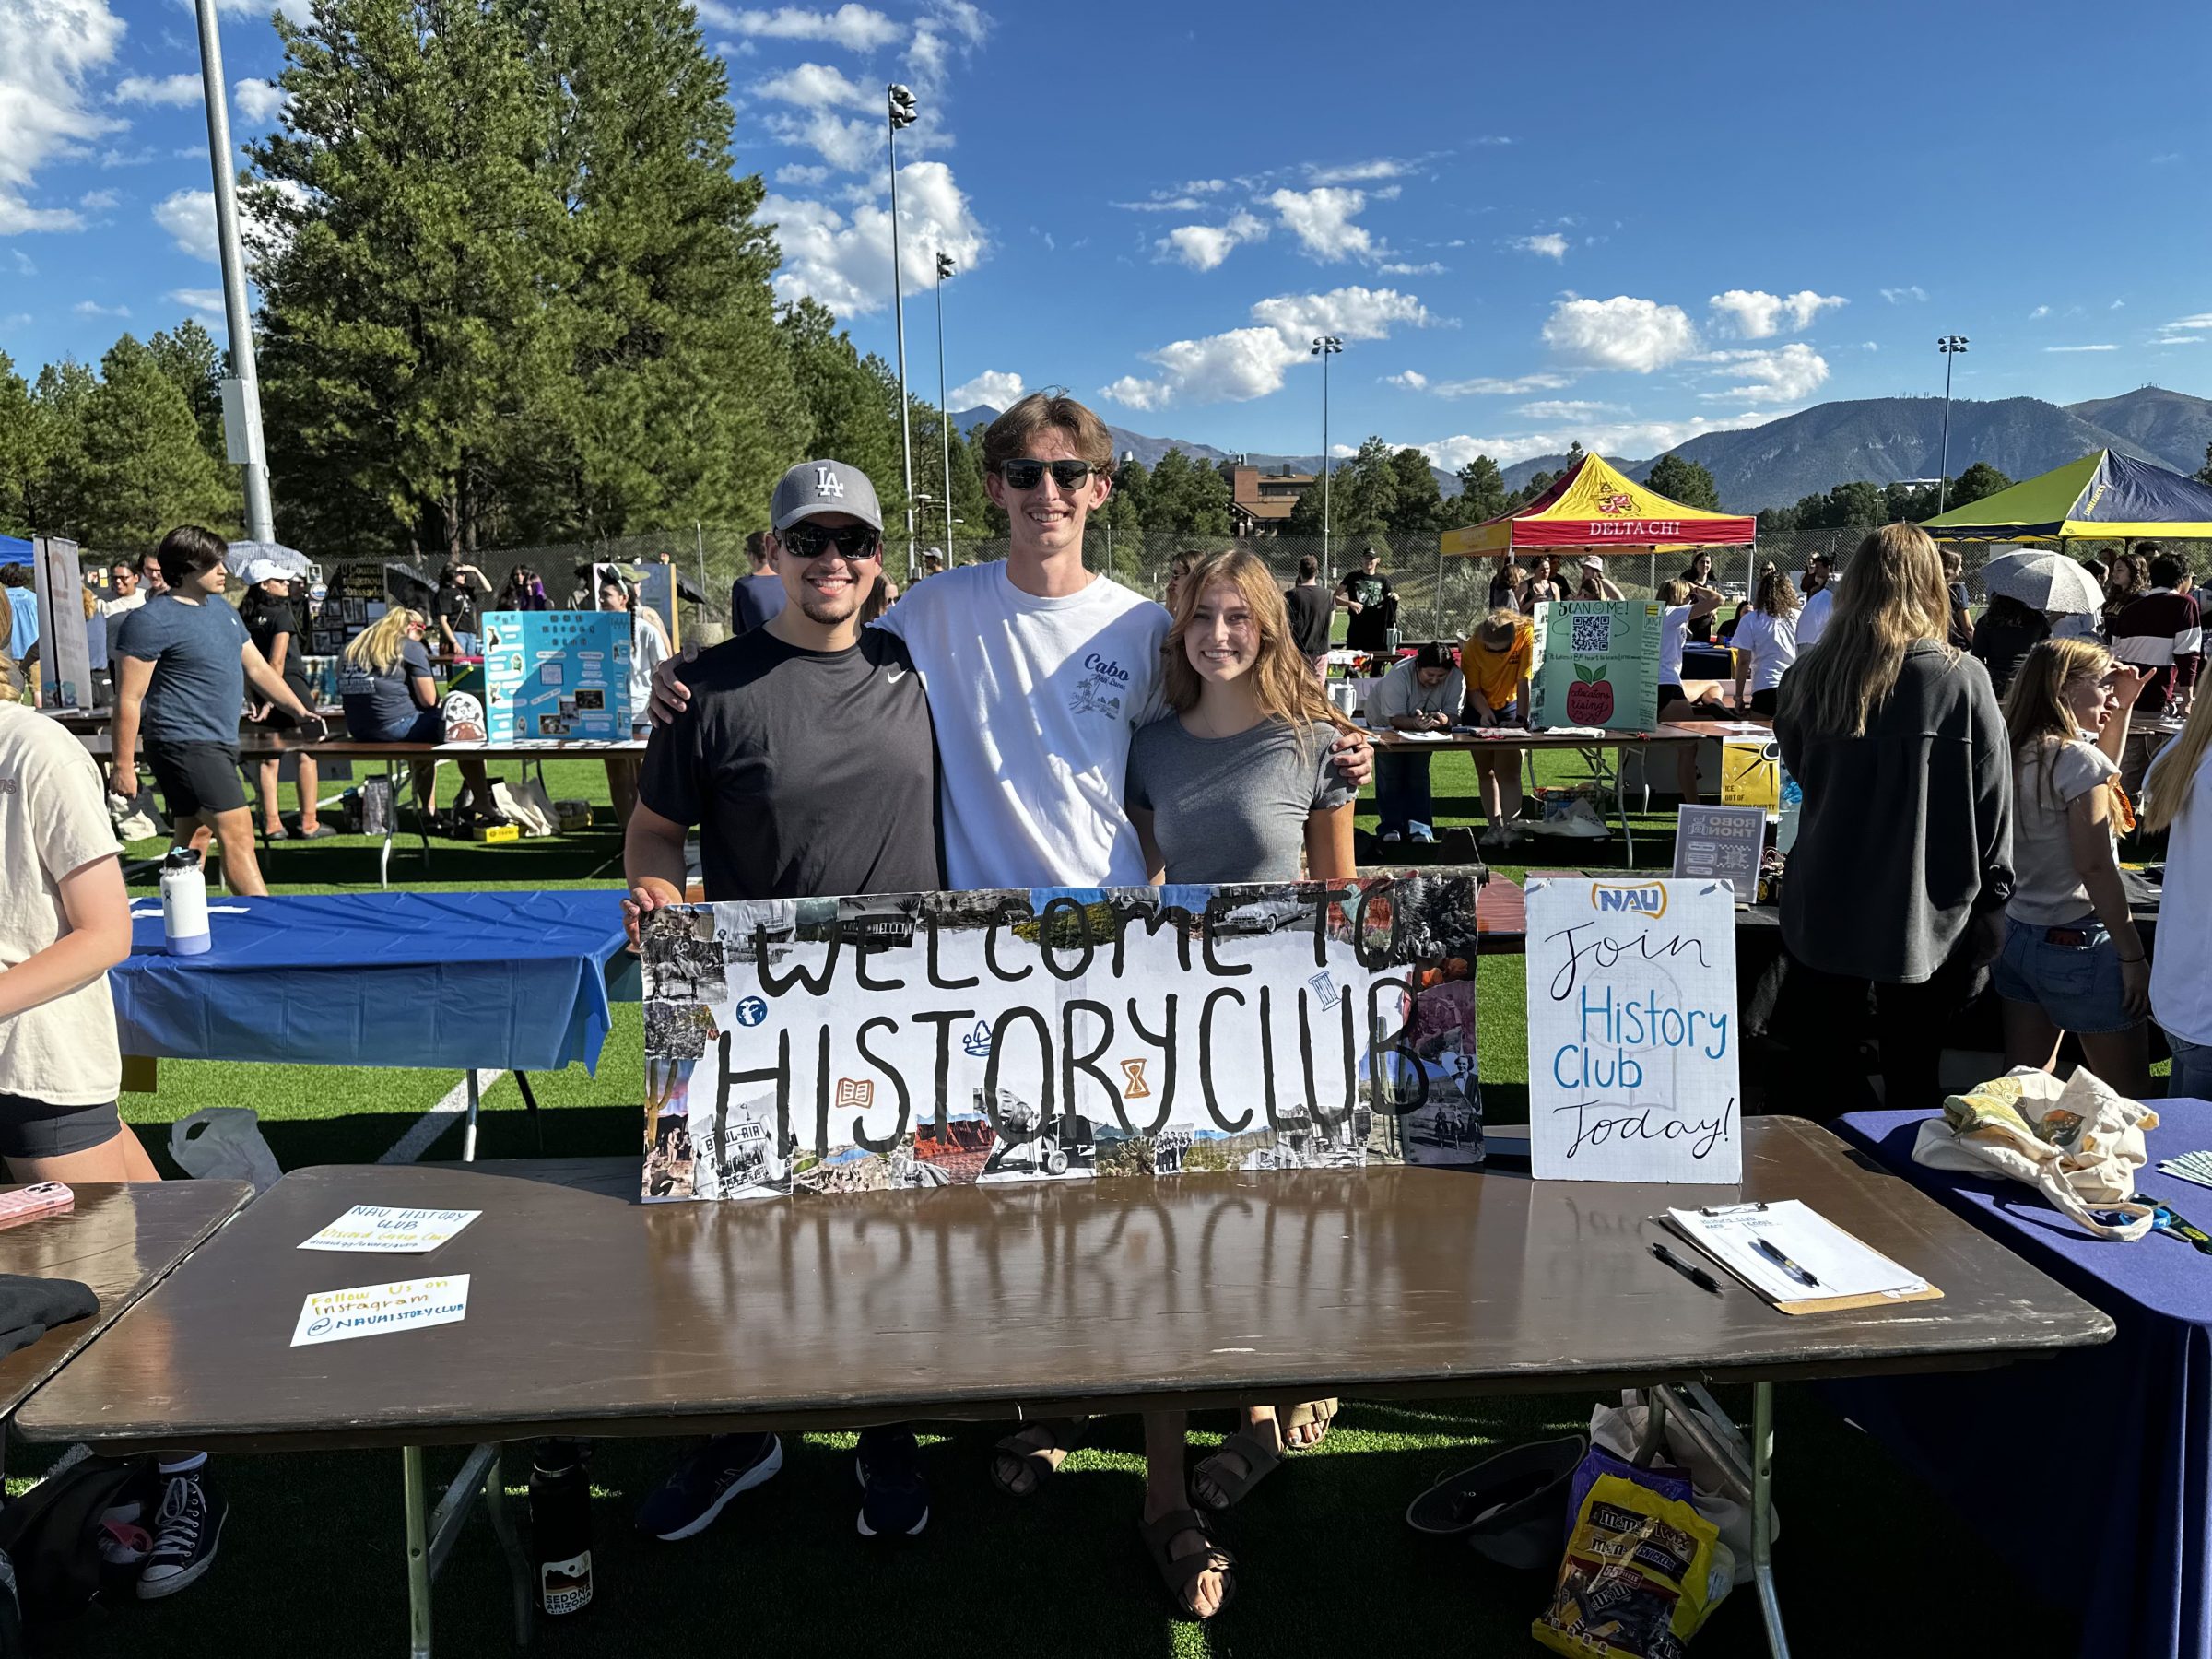 Students at club fair with history club table